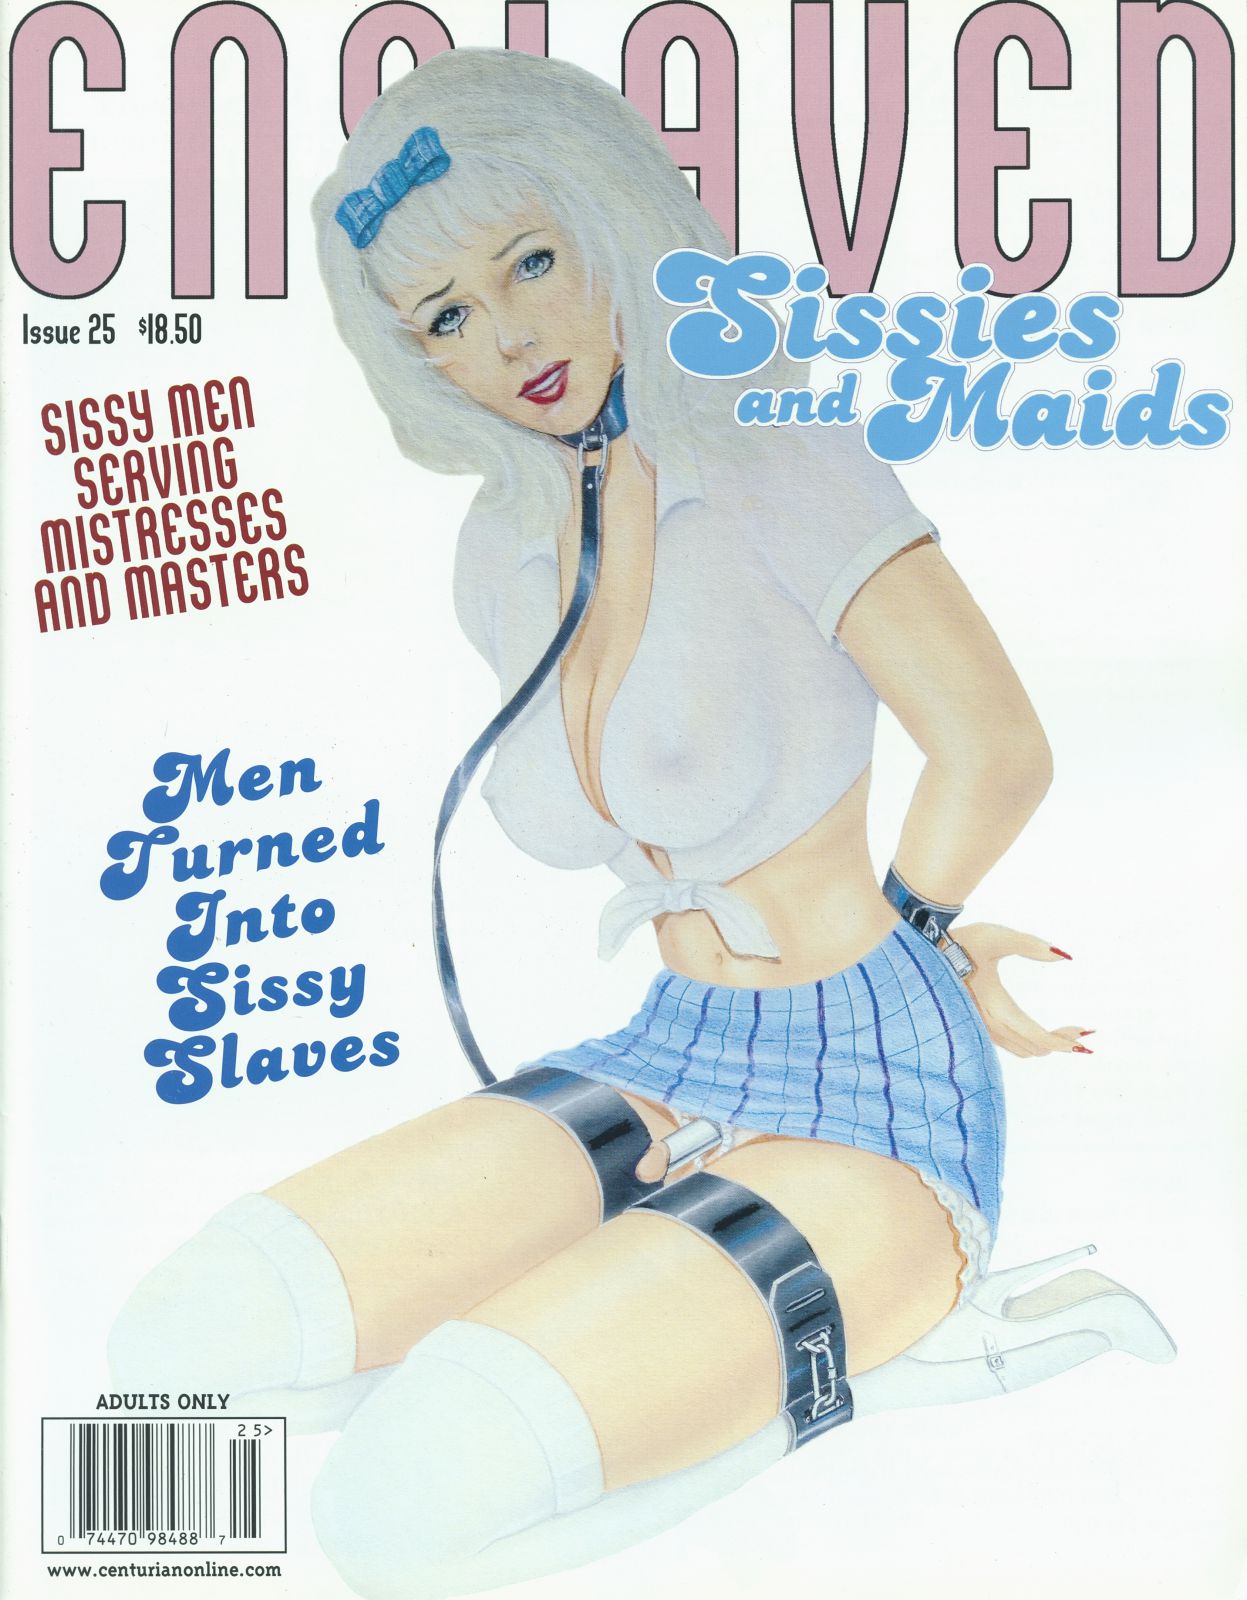 Enslaved - Sissies and Maids Issue 25